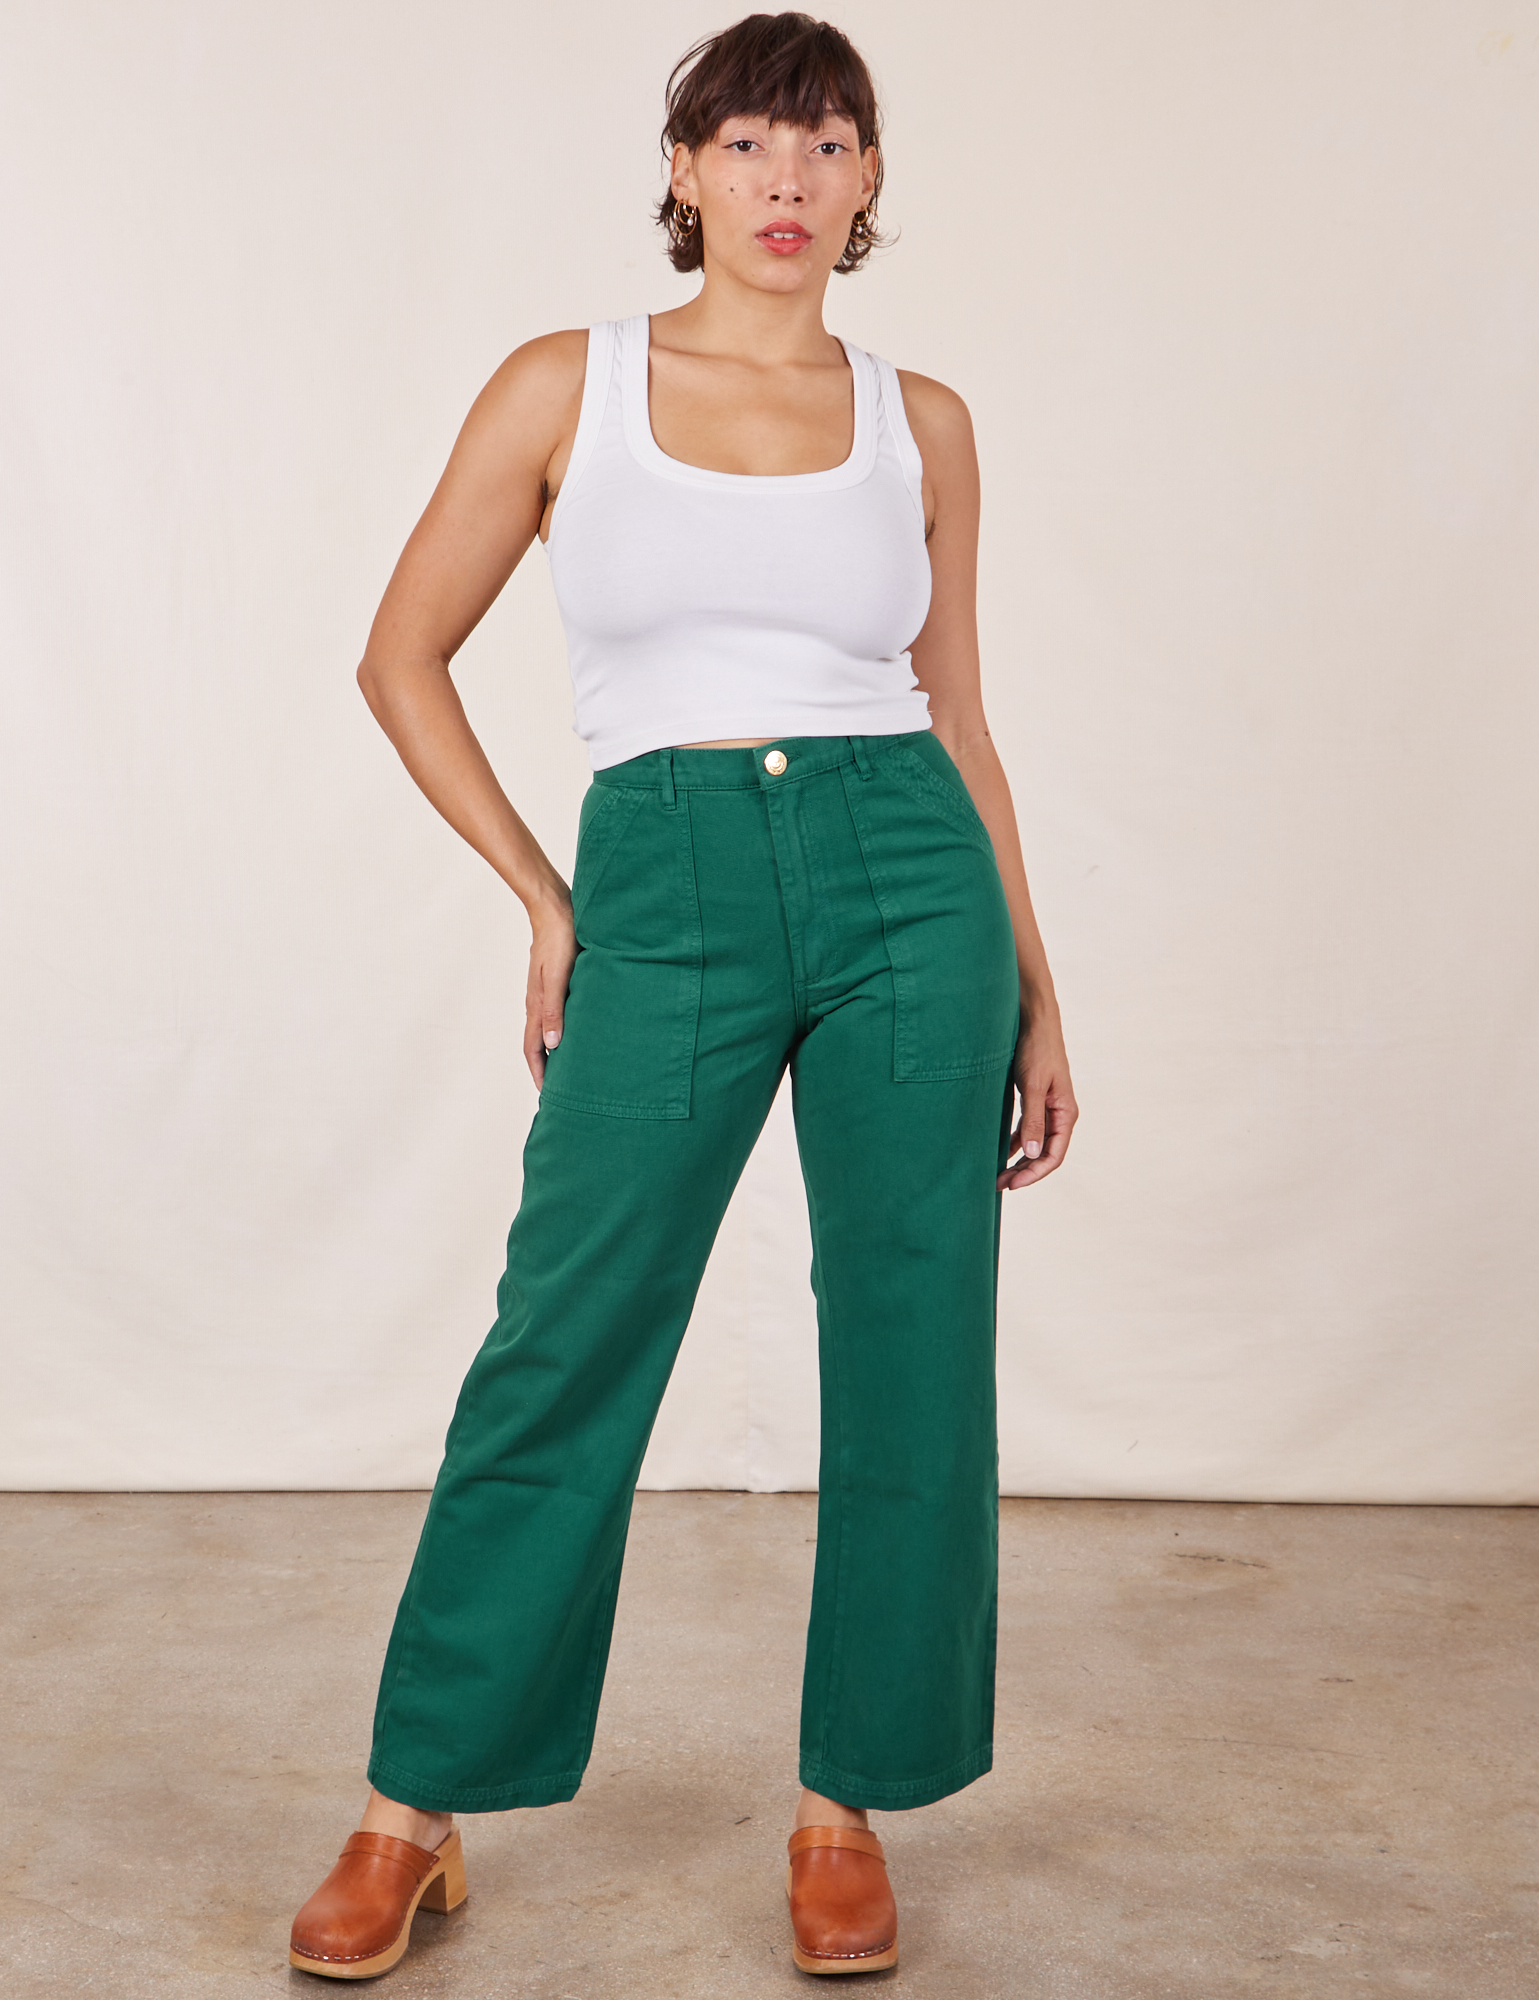 Tiara is 5&#39;5&quot; and wearing S Work Pants in Hunter Green paired with Cropped Tank Top in vintage tee off-white